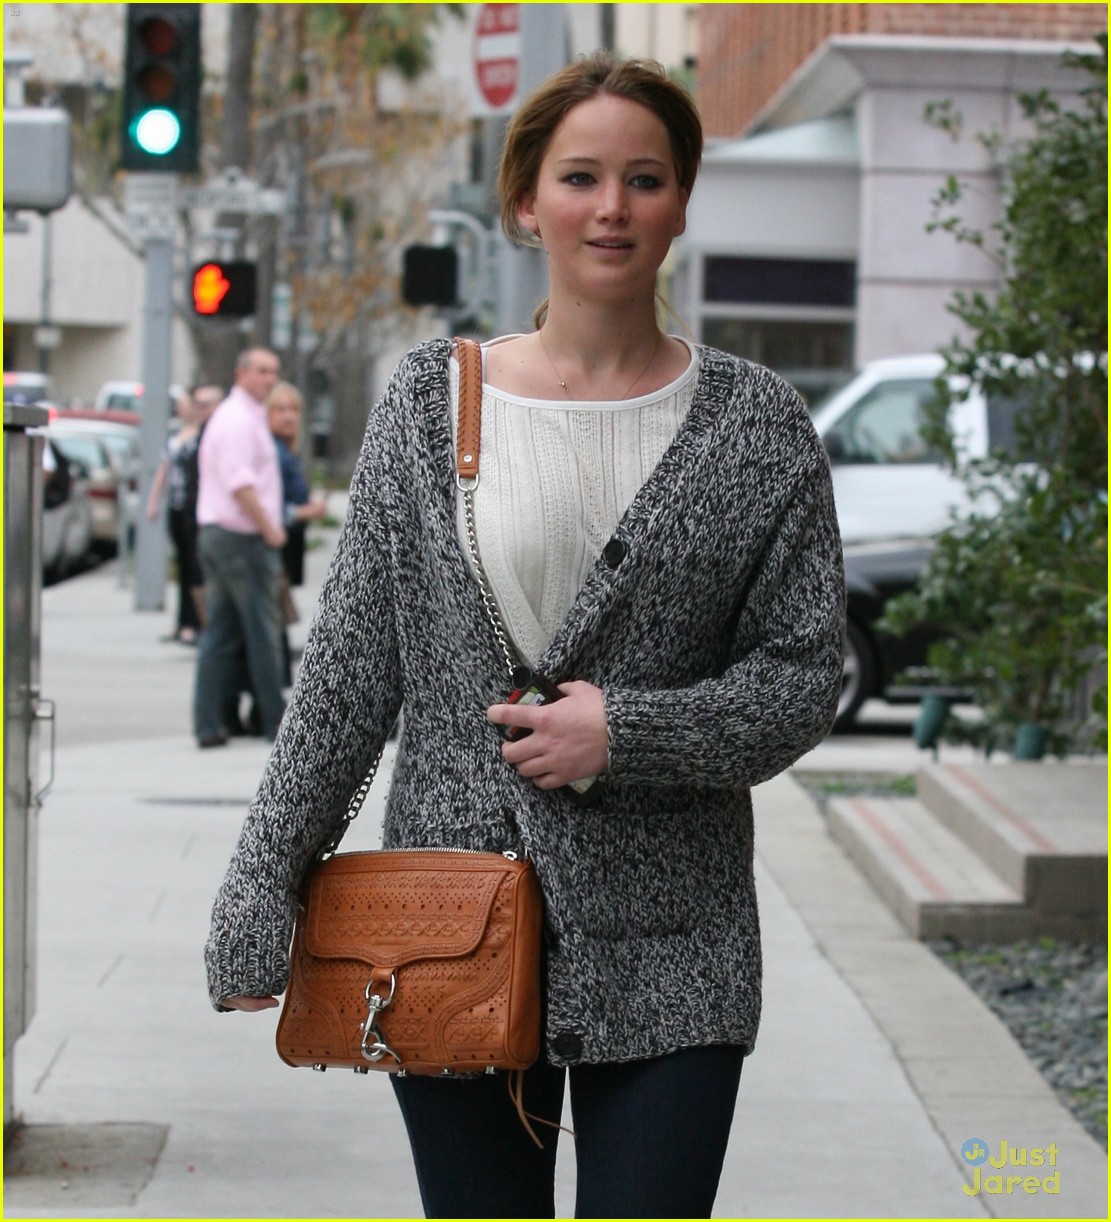 Jennifer Lawrence Can't Wait to Shoot 'Catching Fire' | Photo 458747 ...